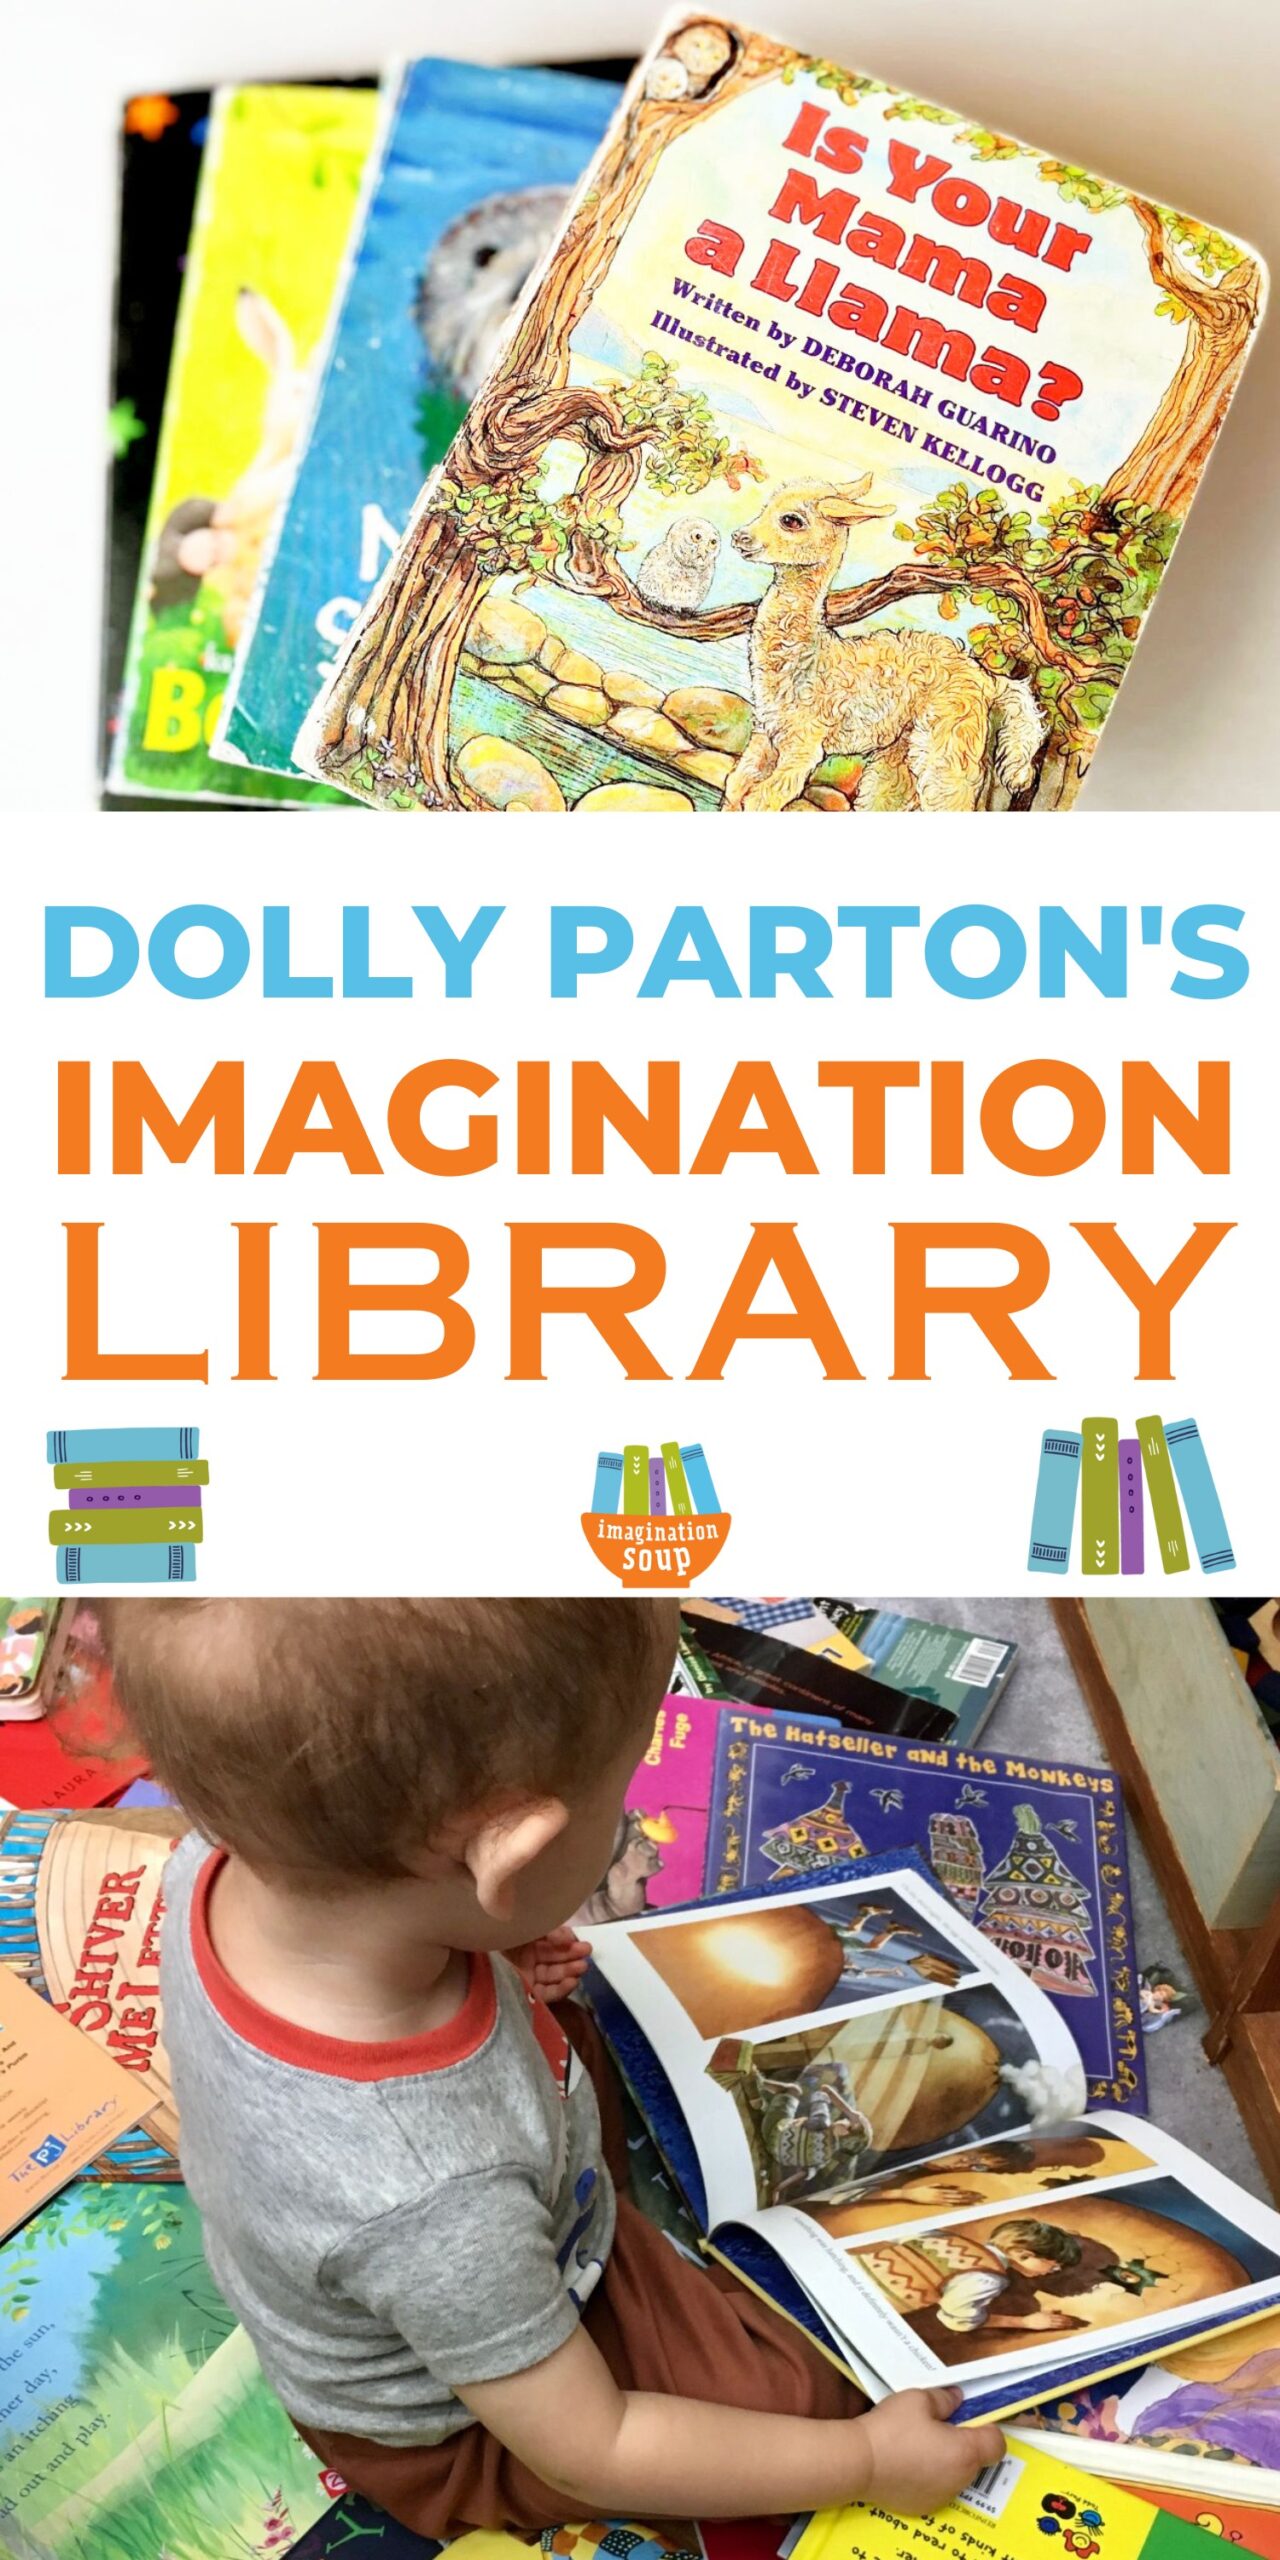 If you've heard of Dolly Parton's Imagination Libary, you know she isn't just a music icon; she's also a well-known philanthropist with a heart for helping children become readers. 